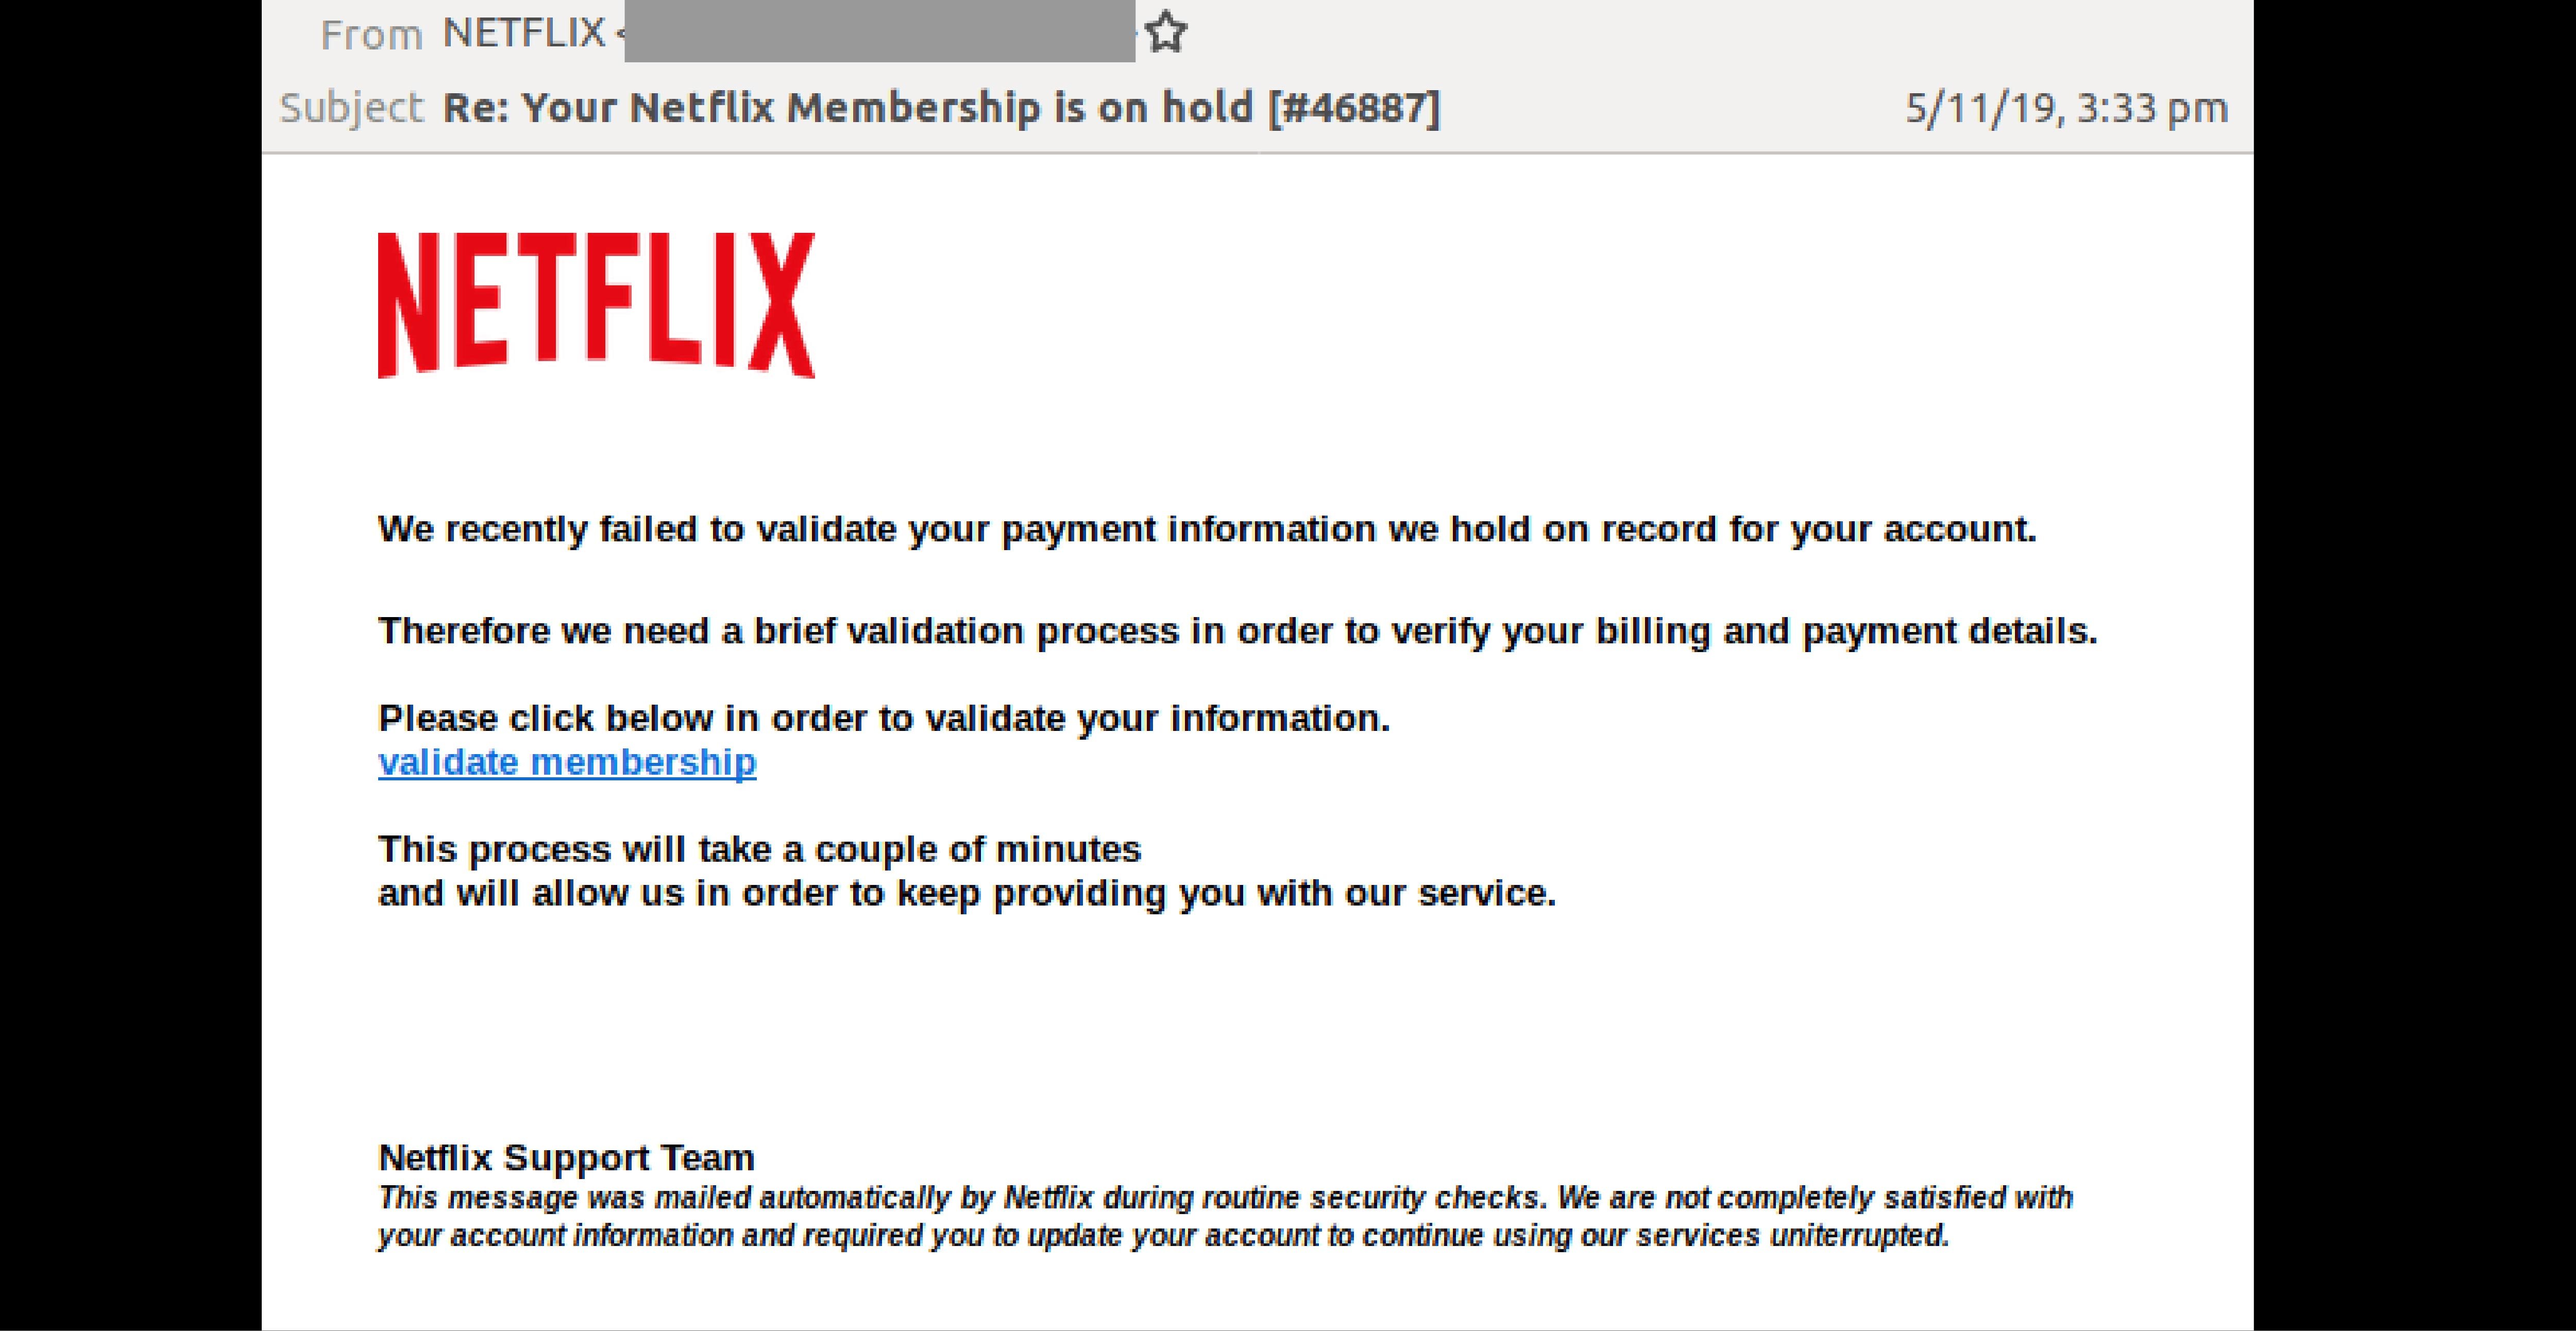 Phishing email scam spoofs Netflix again claims accounts are on hold 